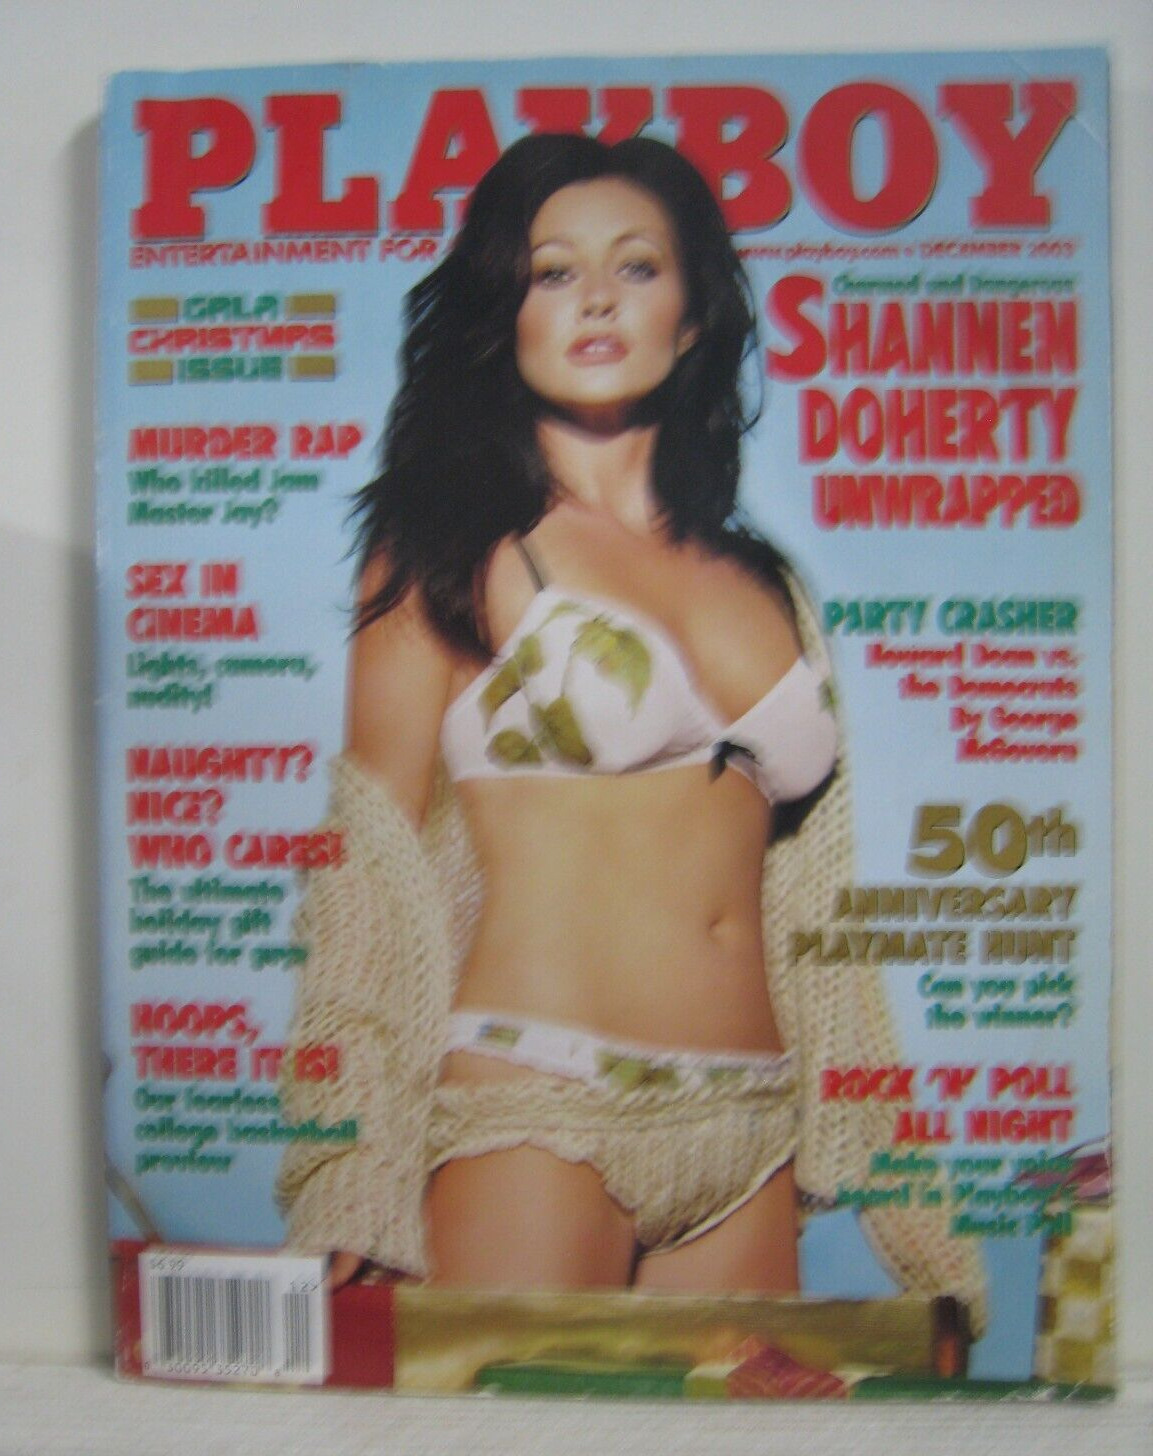 December 2003 Playboy Magazine - Shannen Doherty on Cover.